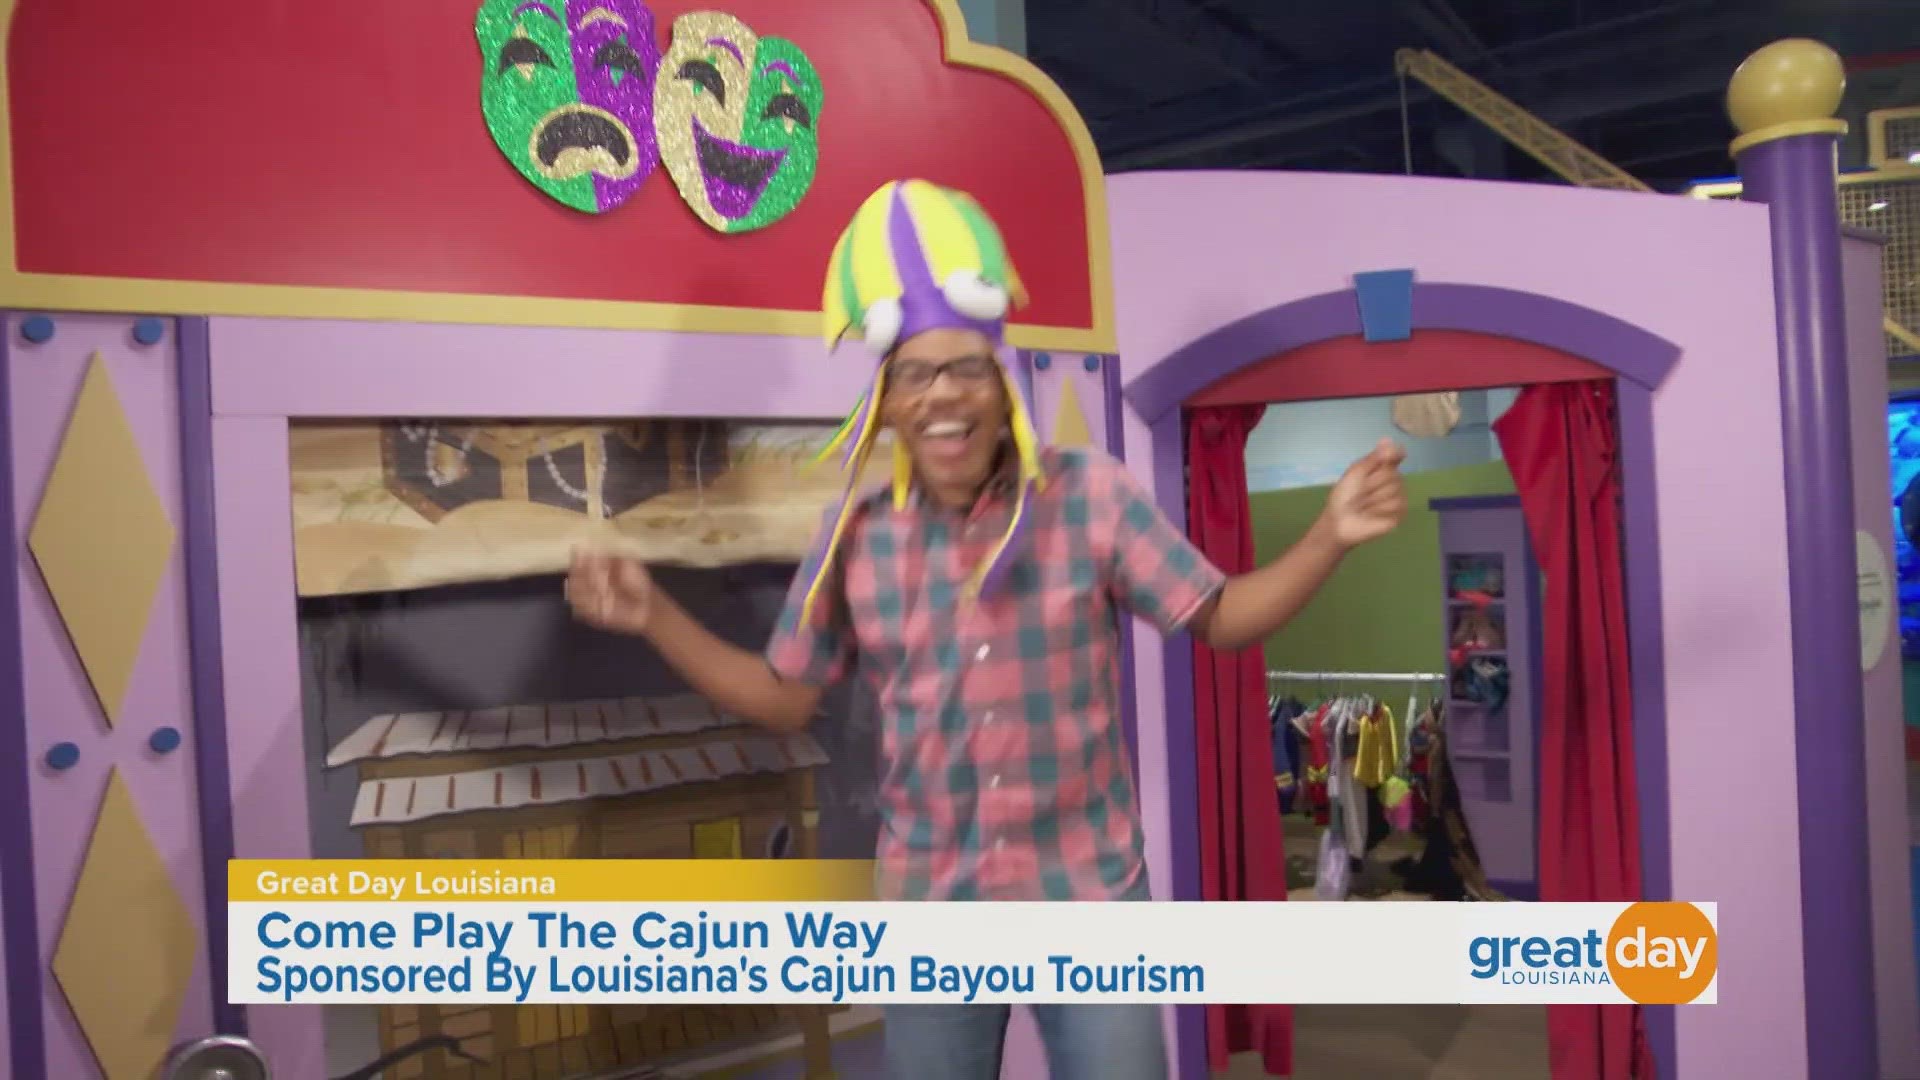 Calling all kids at heart! The Bayou Country Children's Museum is a must-stop on a One Tank Trip to Louisiana's Cajun Bayou.